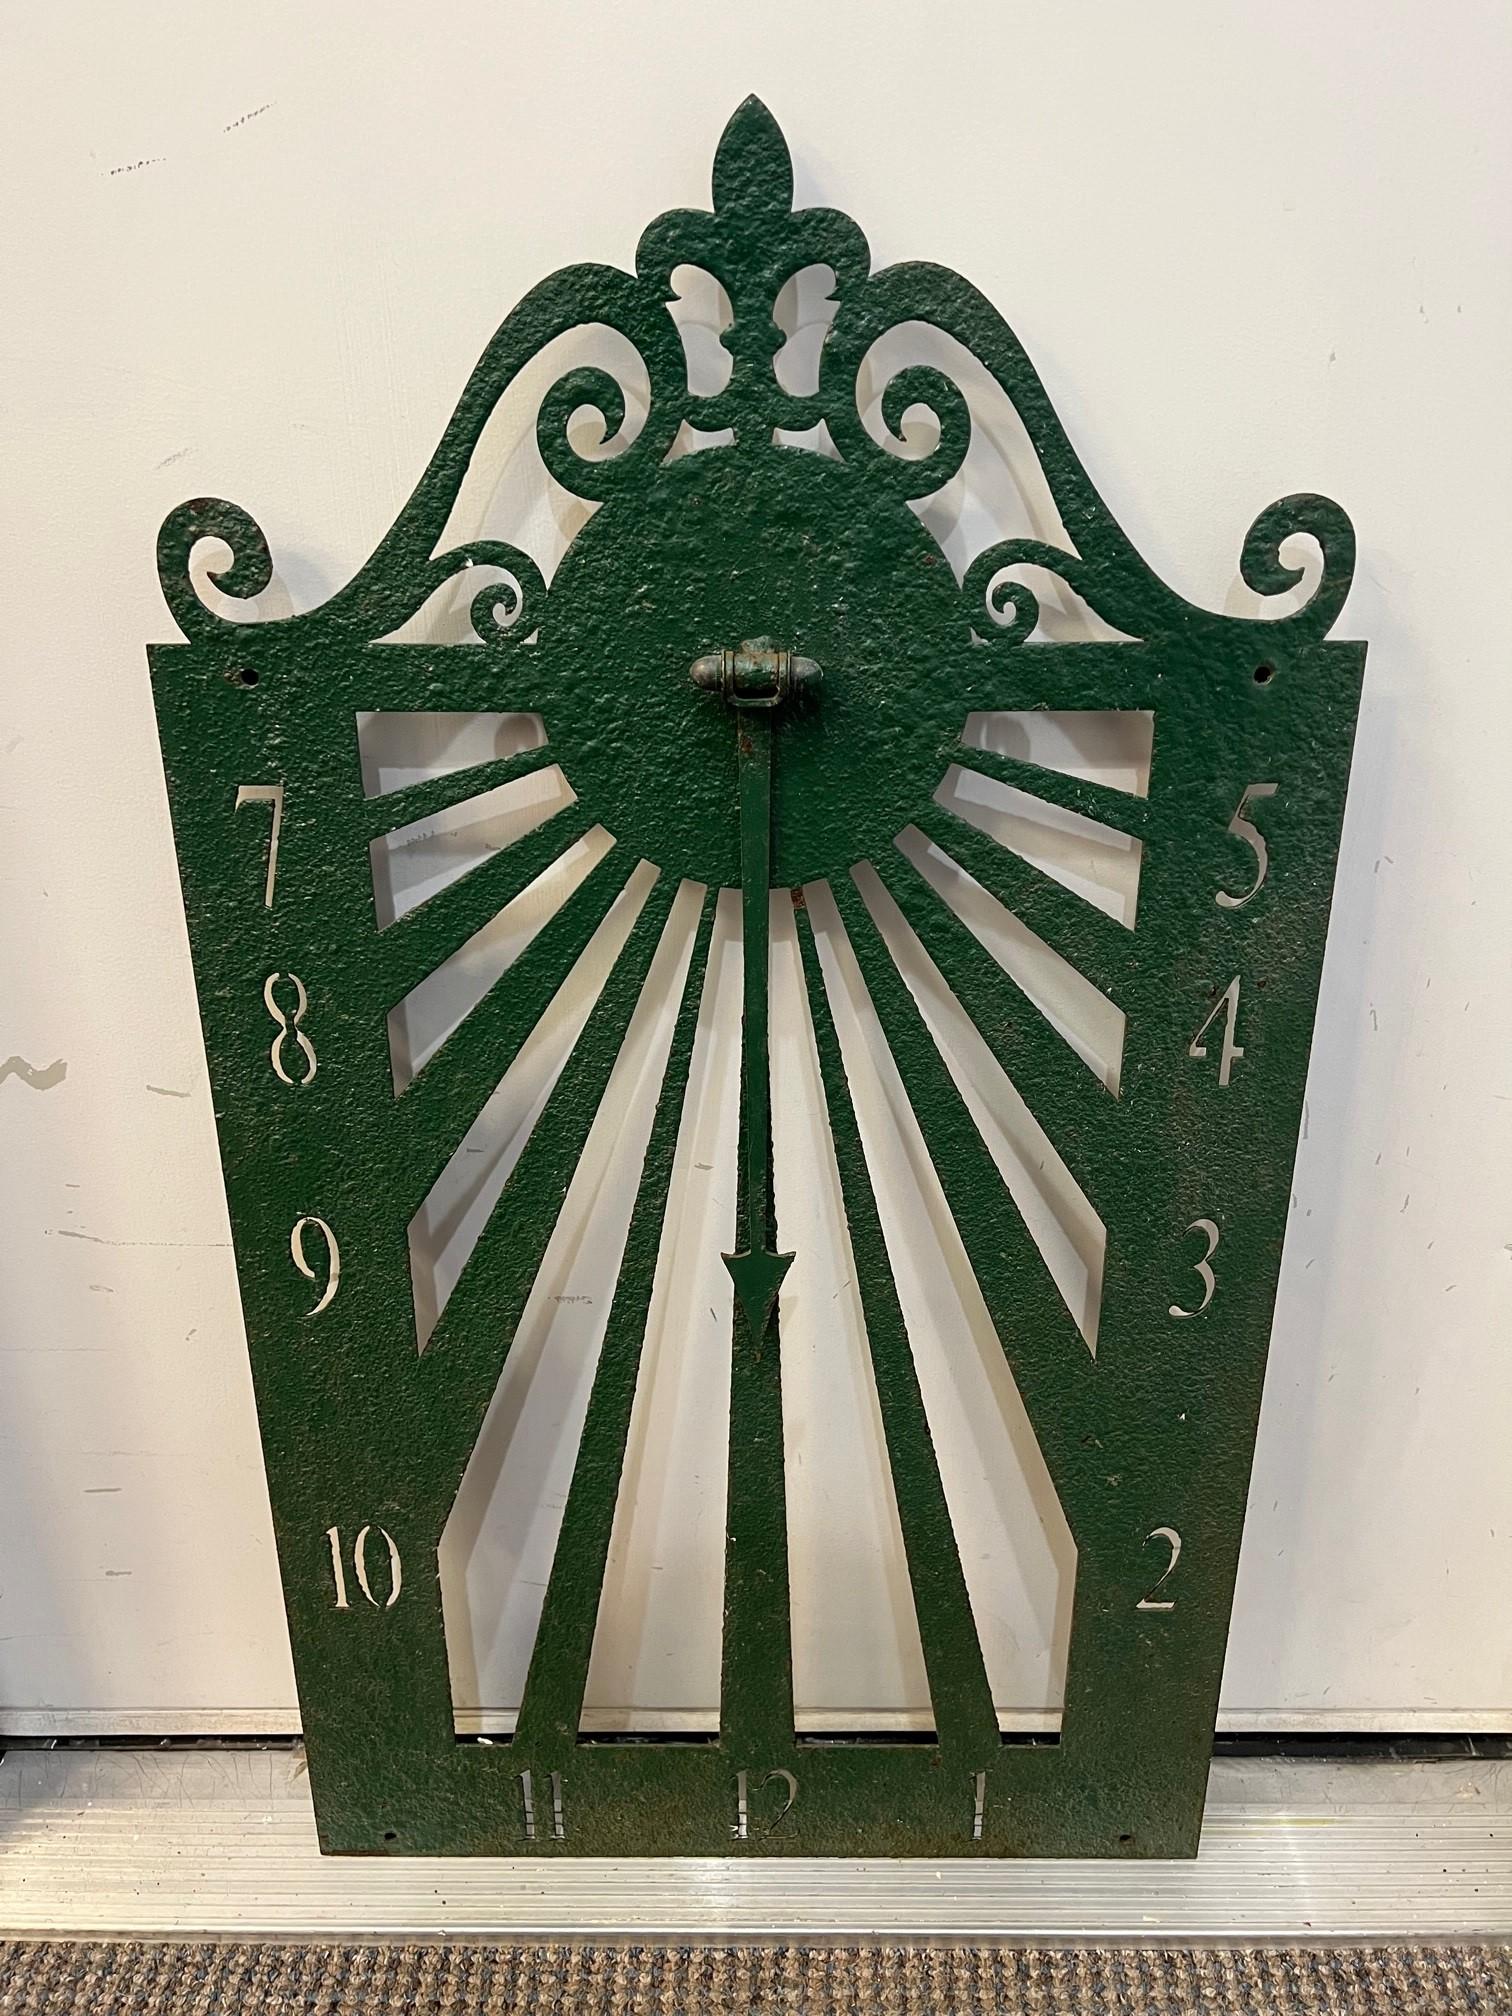 Mid 20th Century antique iron wall sundial with a nice weathered paint finish. This is an unusual sundial that mounts on a wall facing South to tell the time of day. Hanging in the center of the sundial is an iron arrow known as a Gnomon. The Gnomon